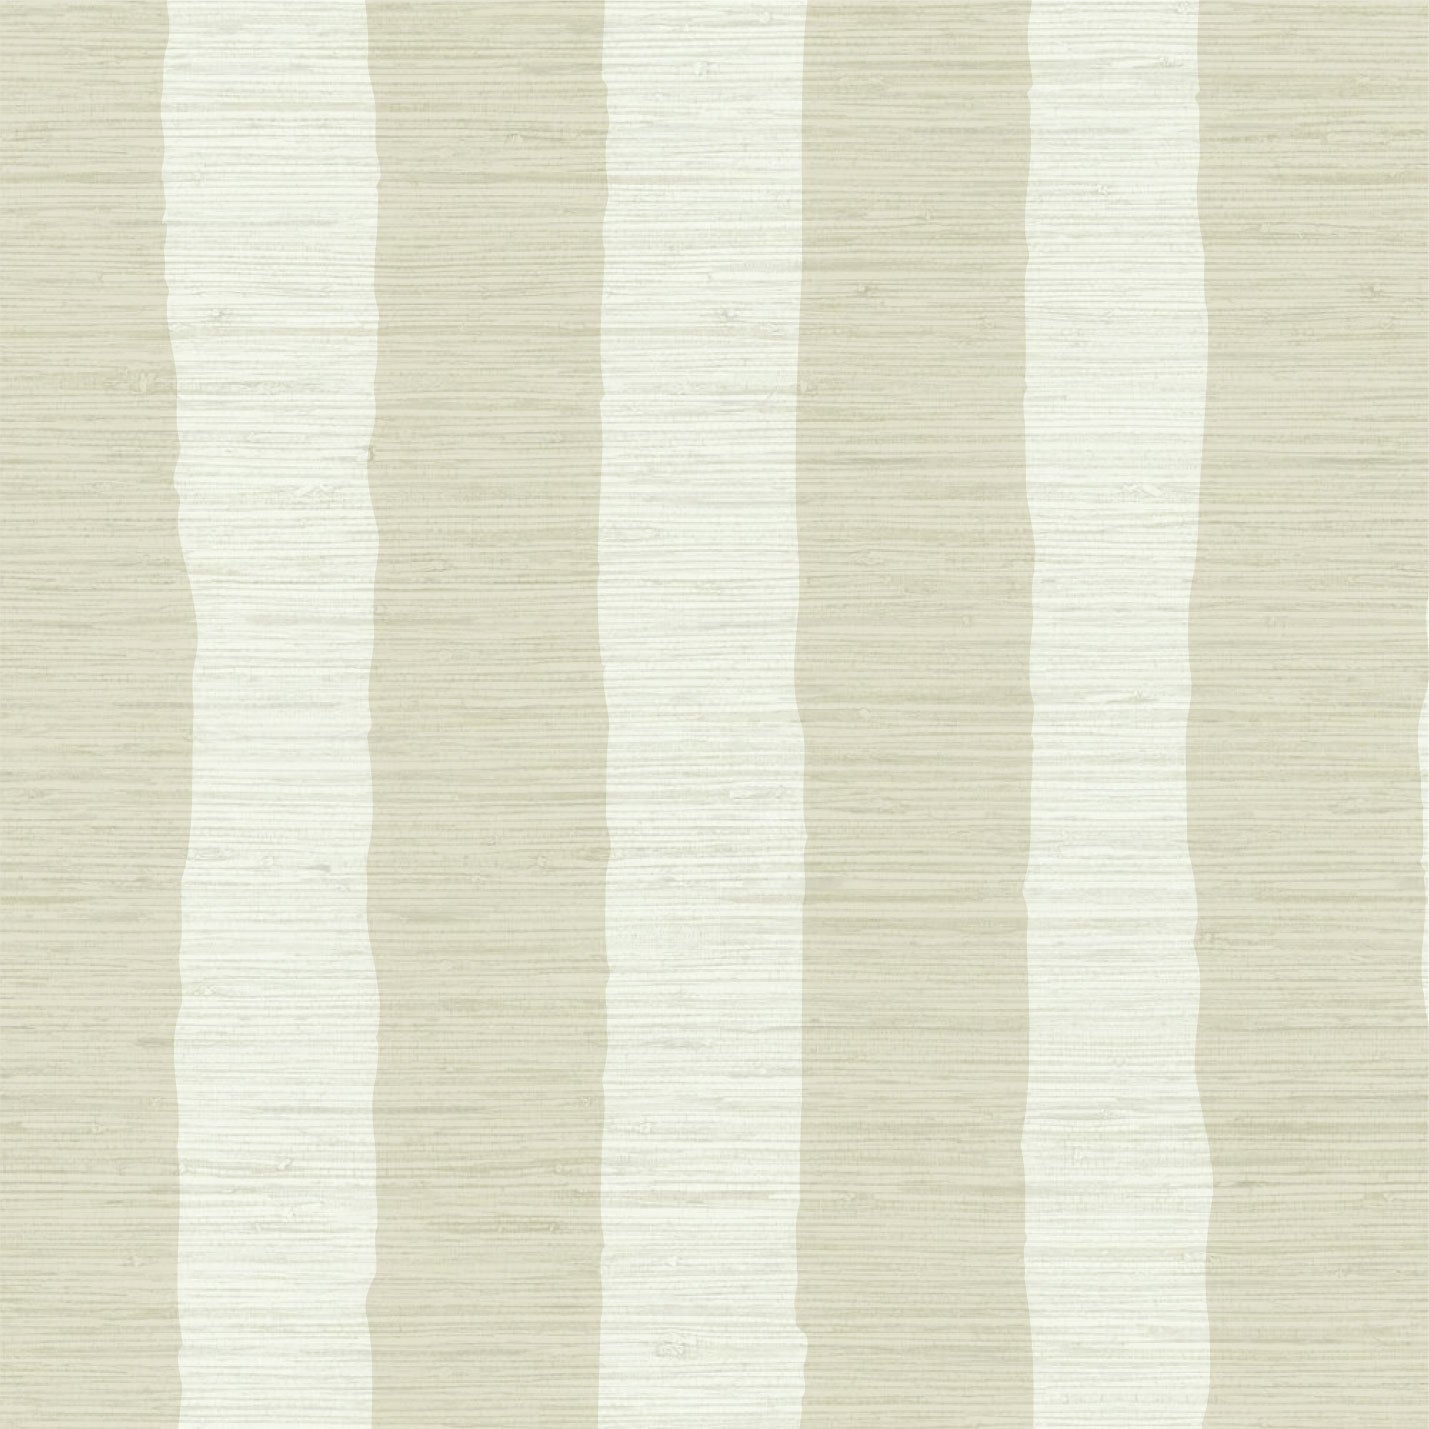 Load image into Gallery viewer, Classic wide 2 color stripe back to white hand painted lines printed on grasscloth wallpaper
